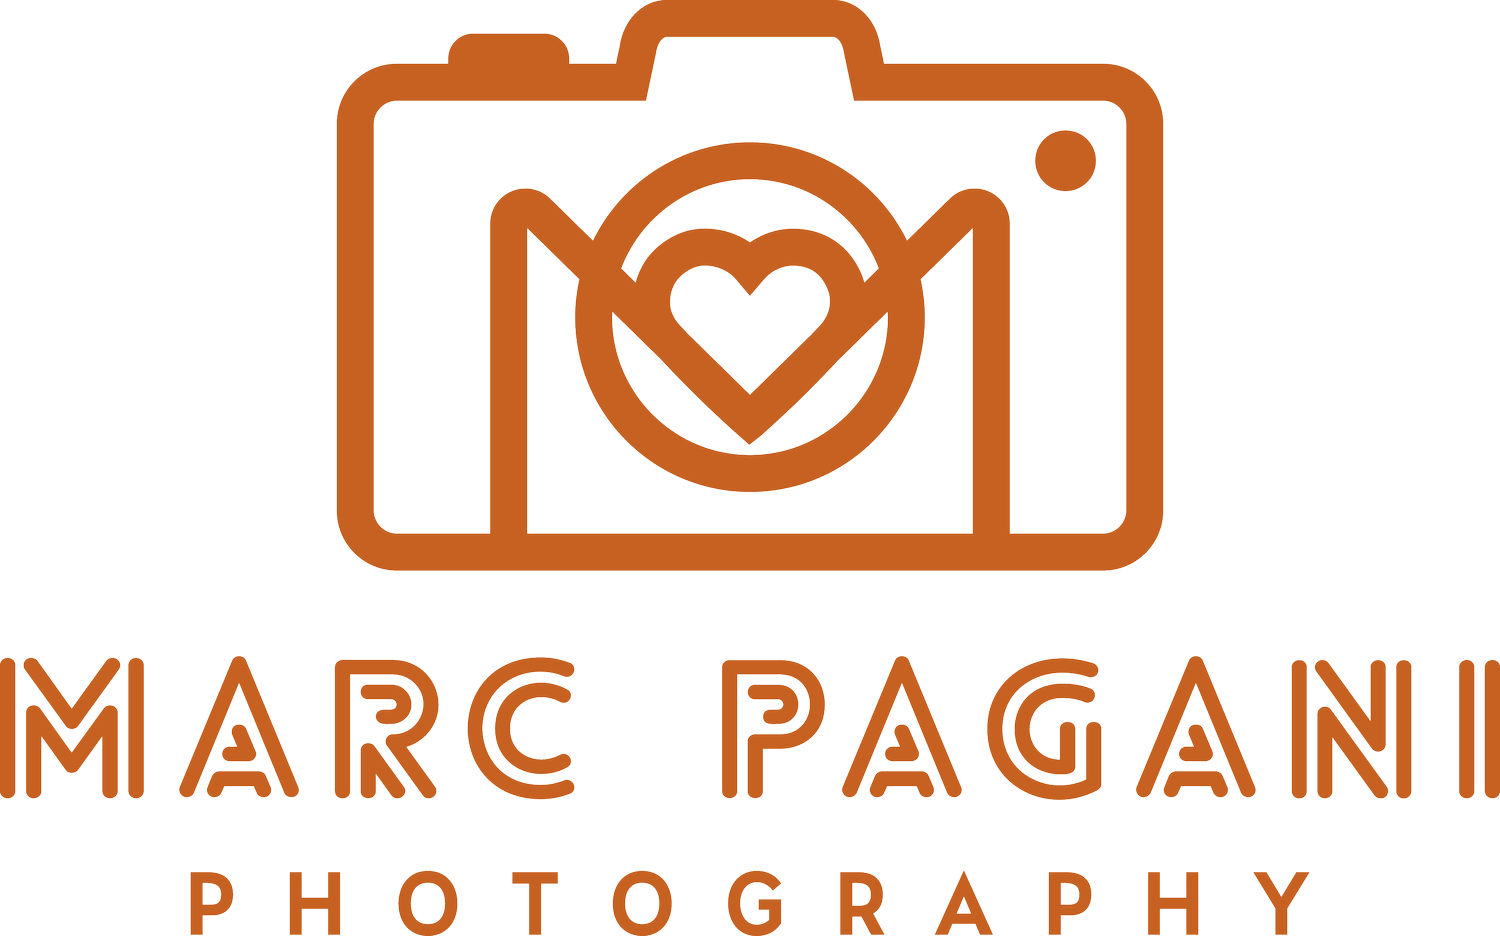 Marc Pagani Photography - New Orleans Wedding Photography Since 1997